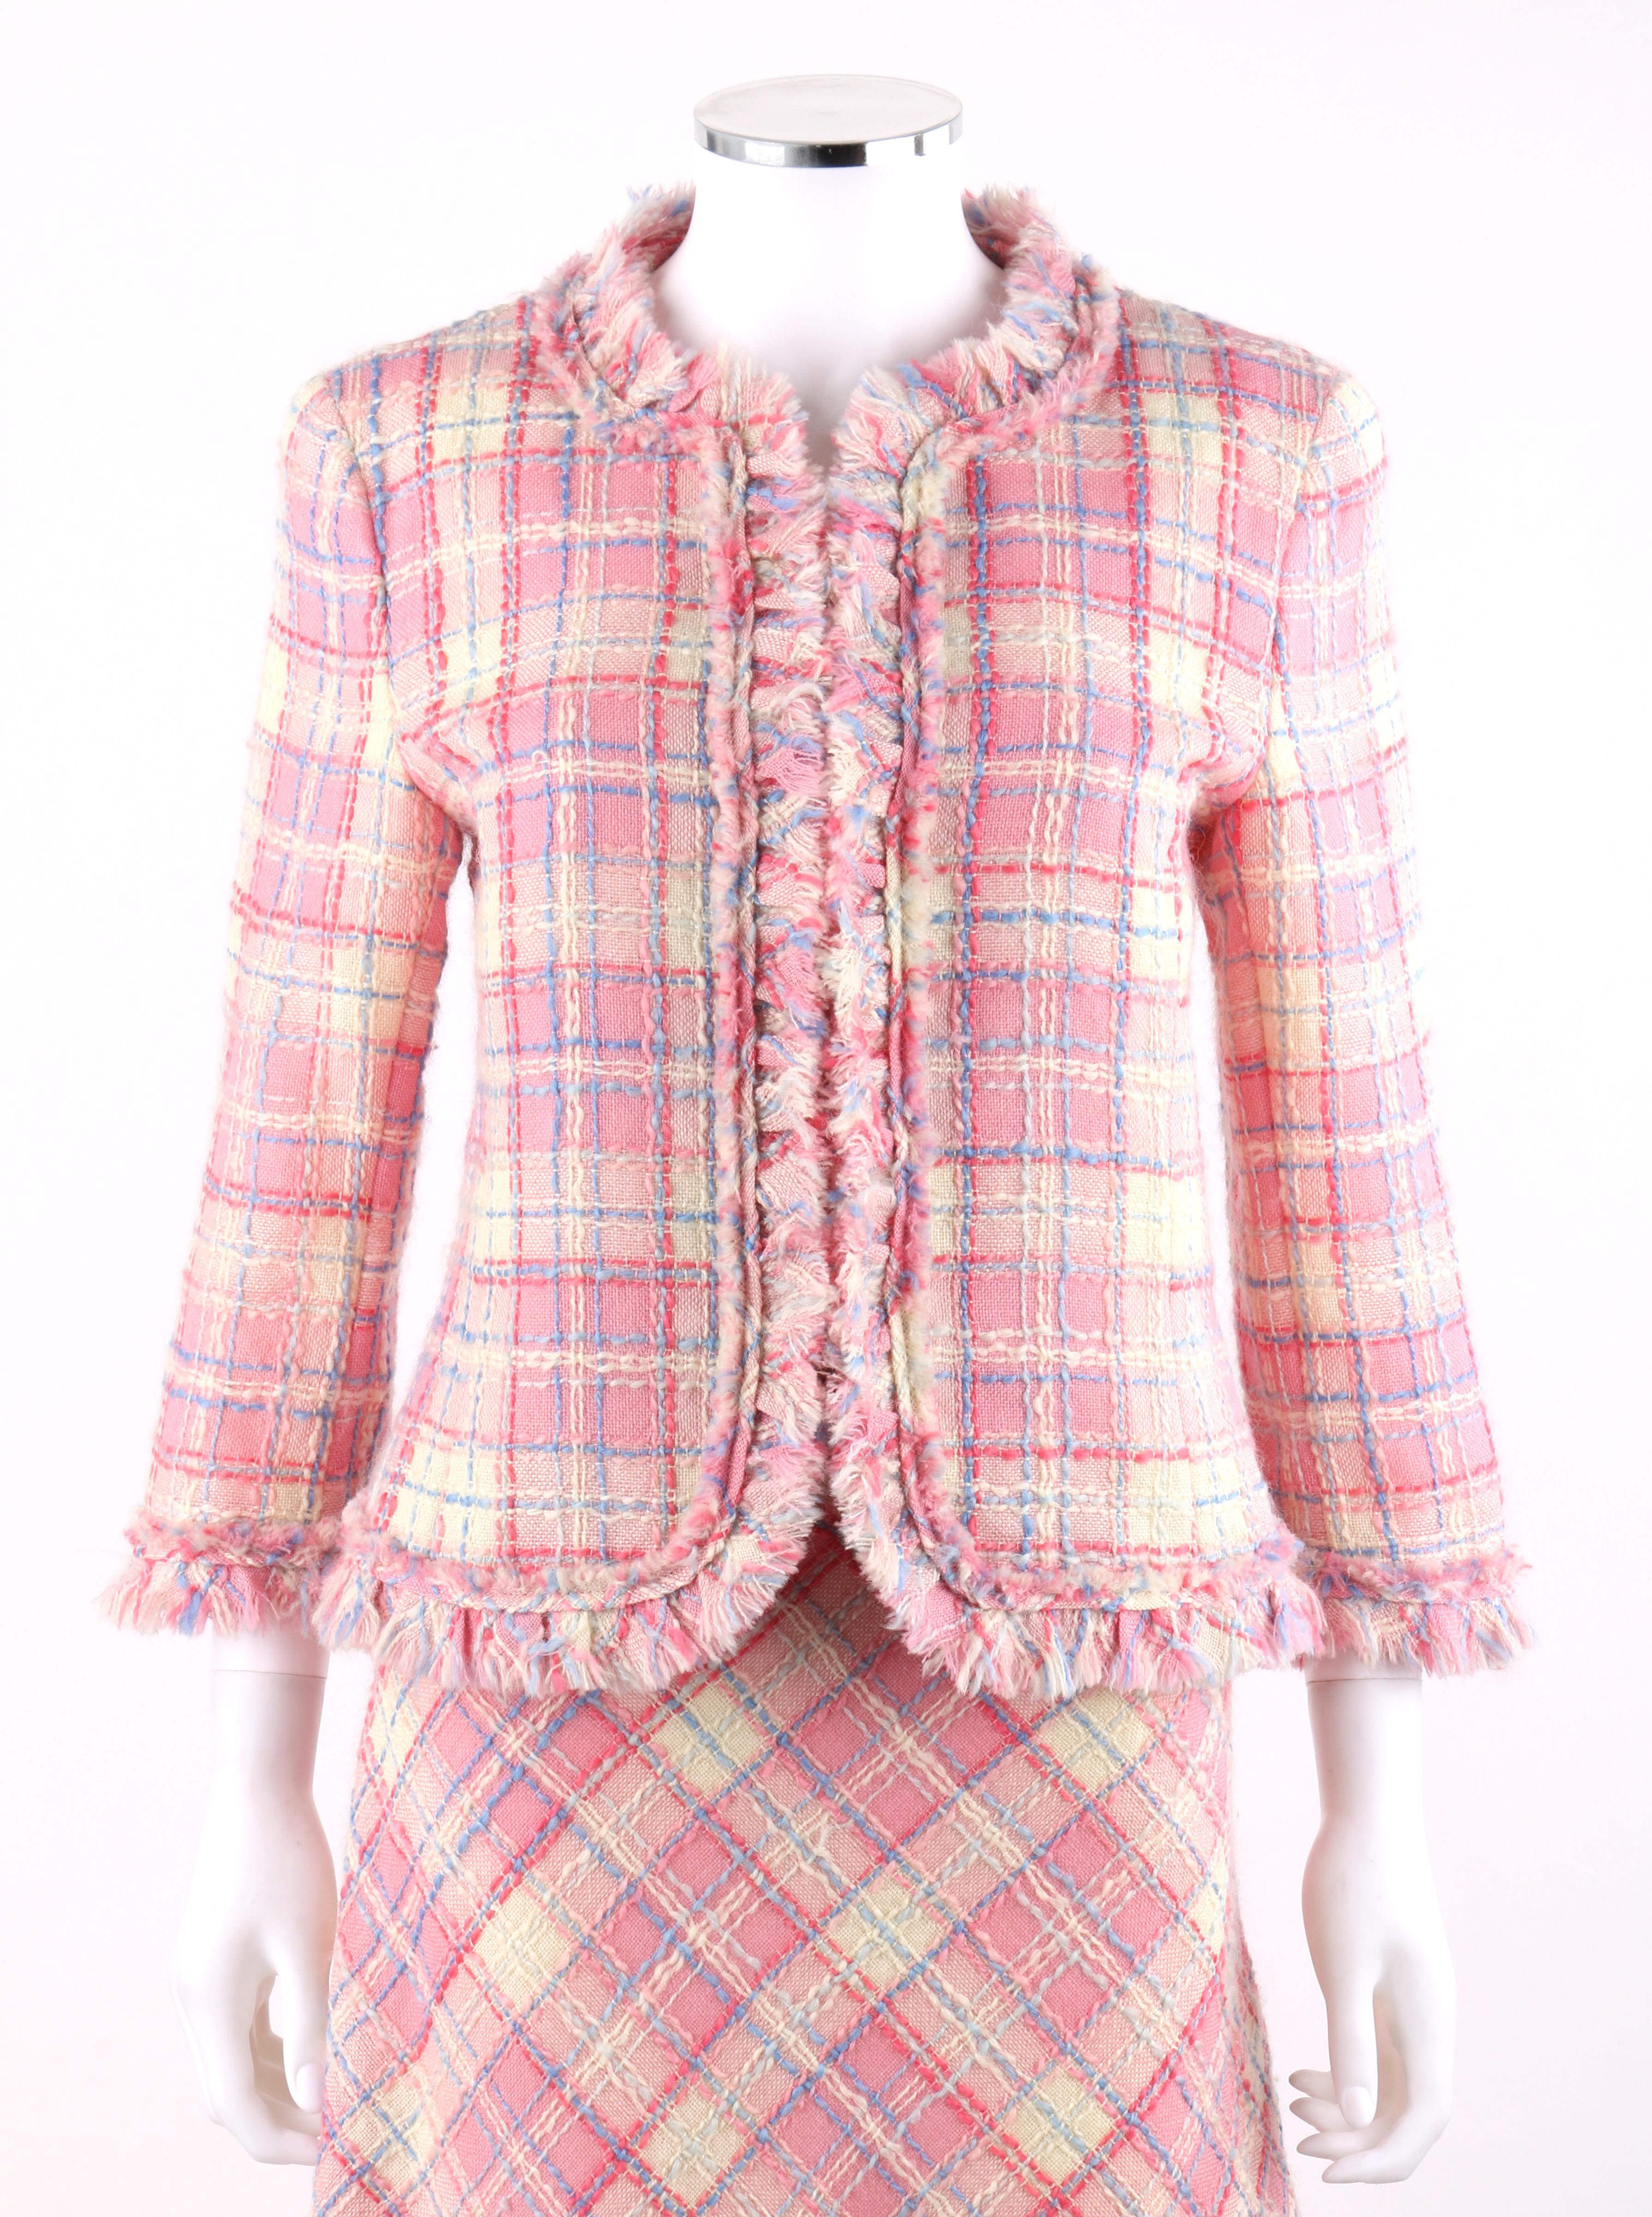 DESCRIPTION: MOSCHINO Cheap & Chic 2pc Pink Plaid Tweed Fringed Jacket Skirt Suit Set 
 
Brand / Manufacturer: Moschino 
Collection: Cheap & Chic 
Style: Skirt Suit
Color(s): Shades of pink, blue, and white
Lined: Yes
Unmarked Fabric Content (feel